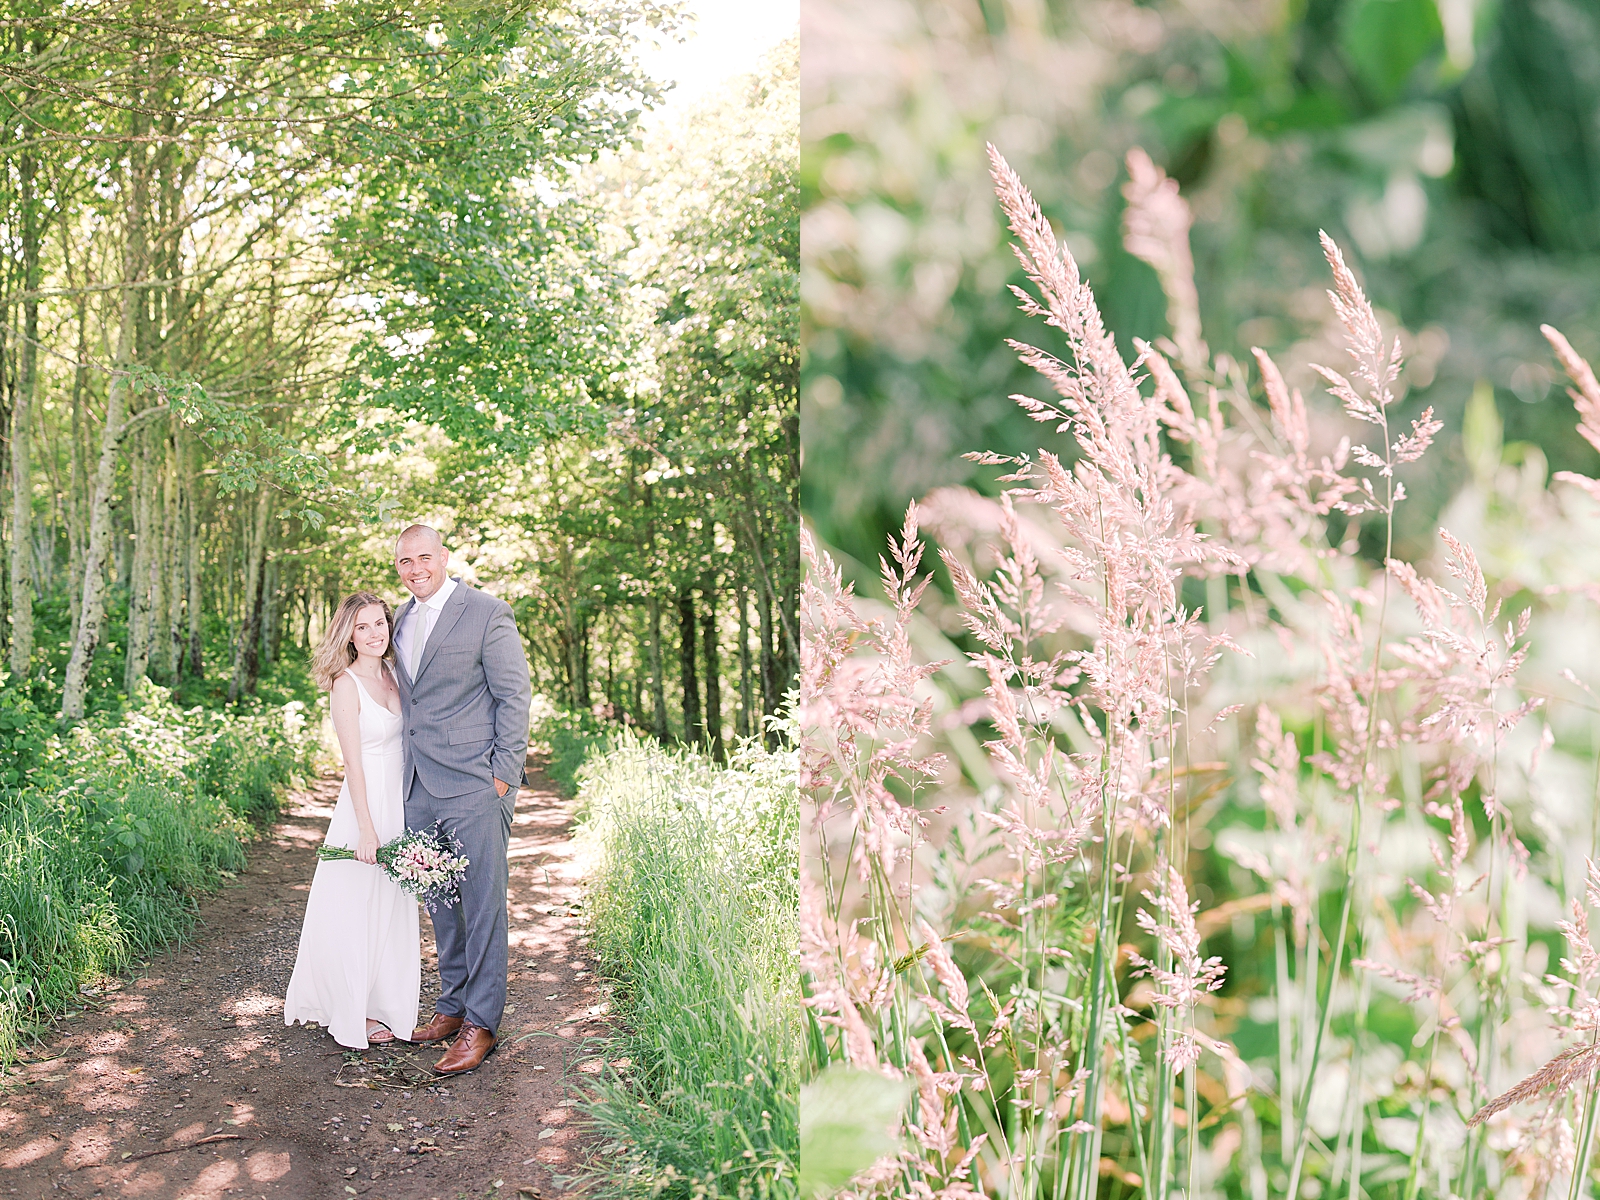 Max Patch Elopement Couple in the Trees Smiling at The Camera and Detail of Grass Photos